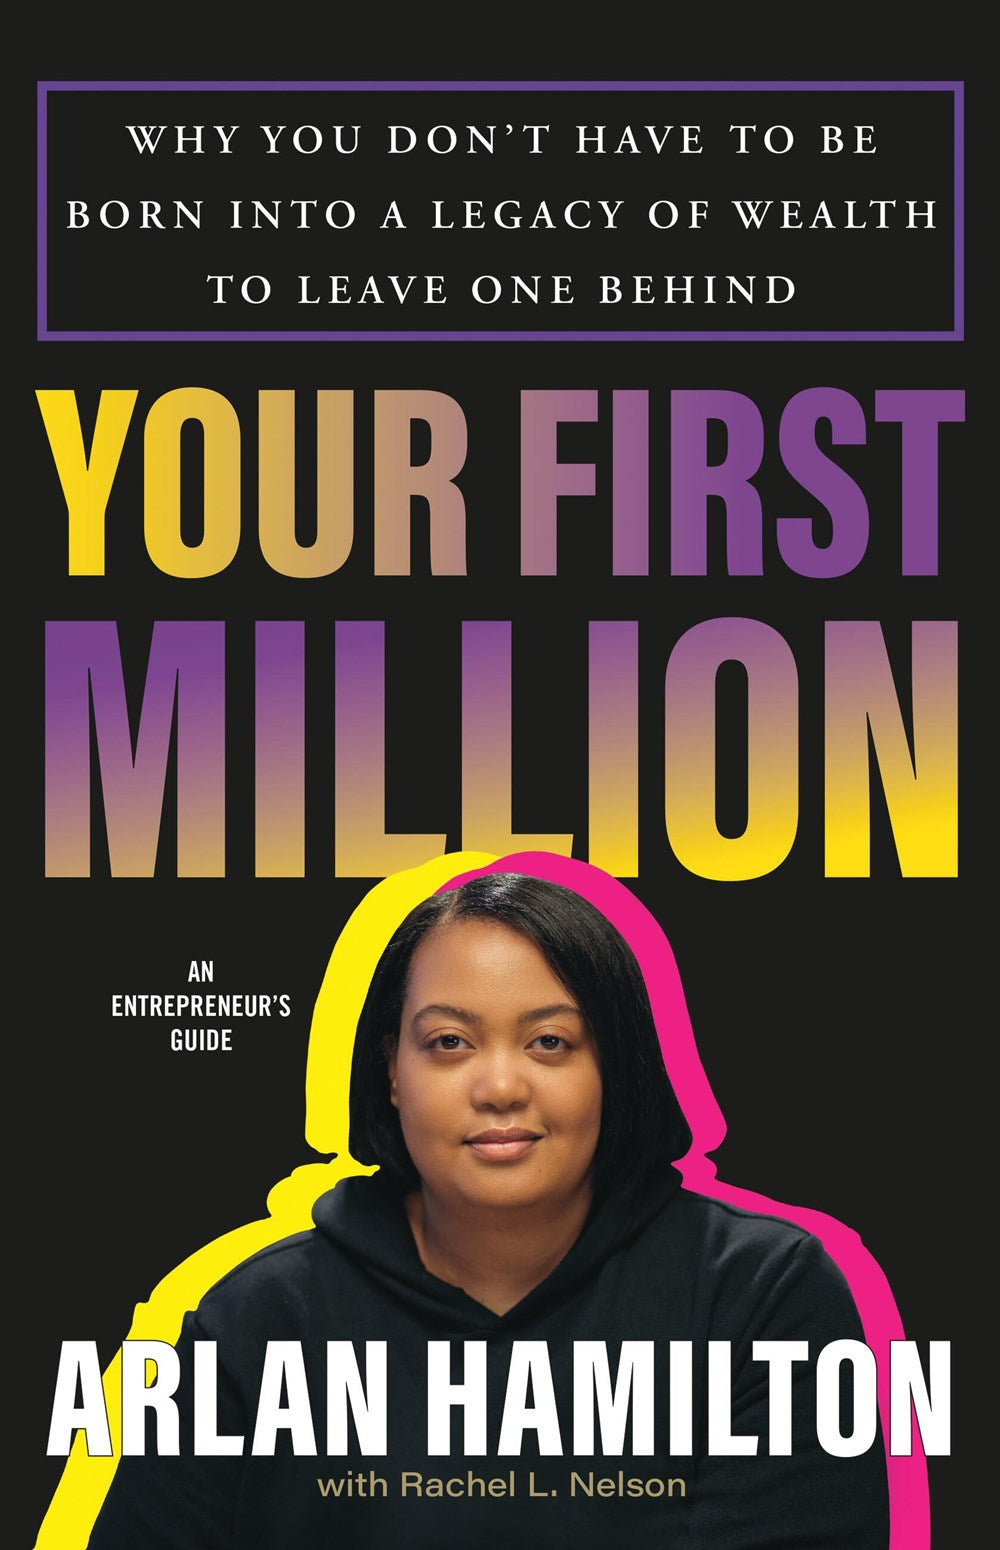 Your First Million: Why You Don’t Have to Be Born into a Legacy of Wealth to Leave One Behind